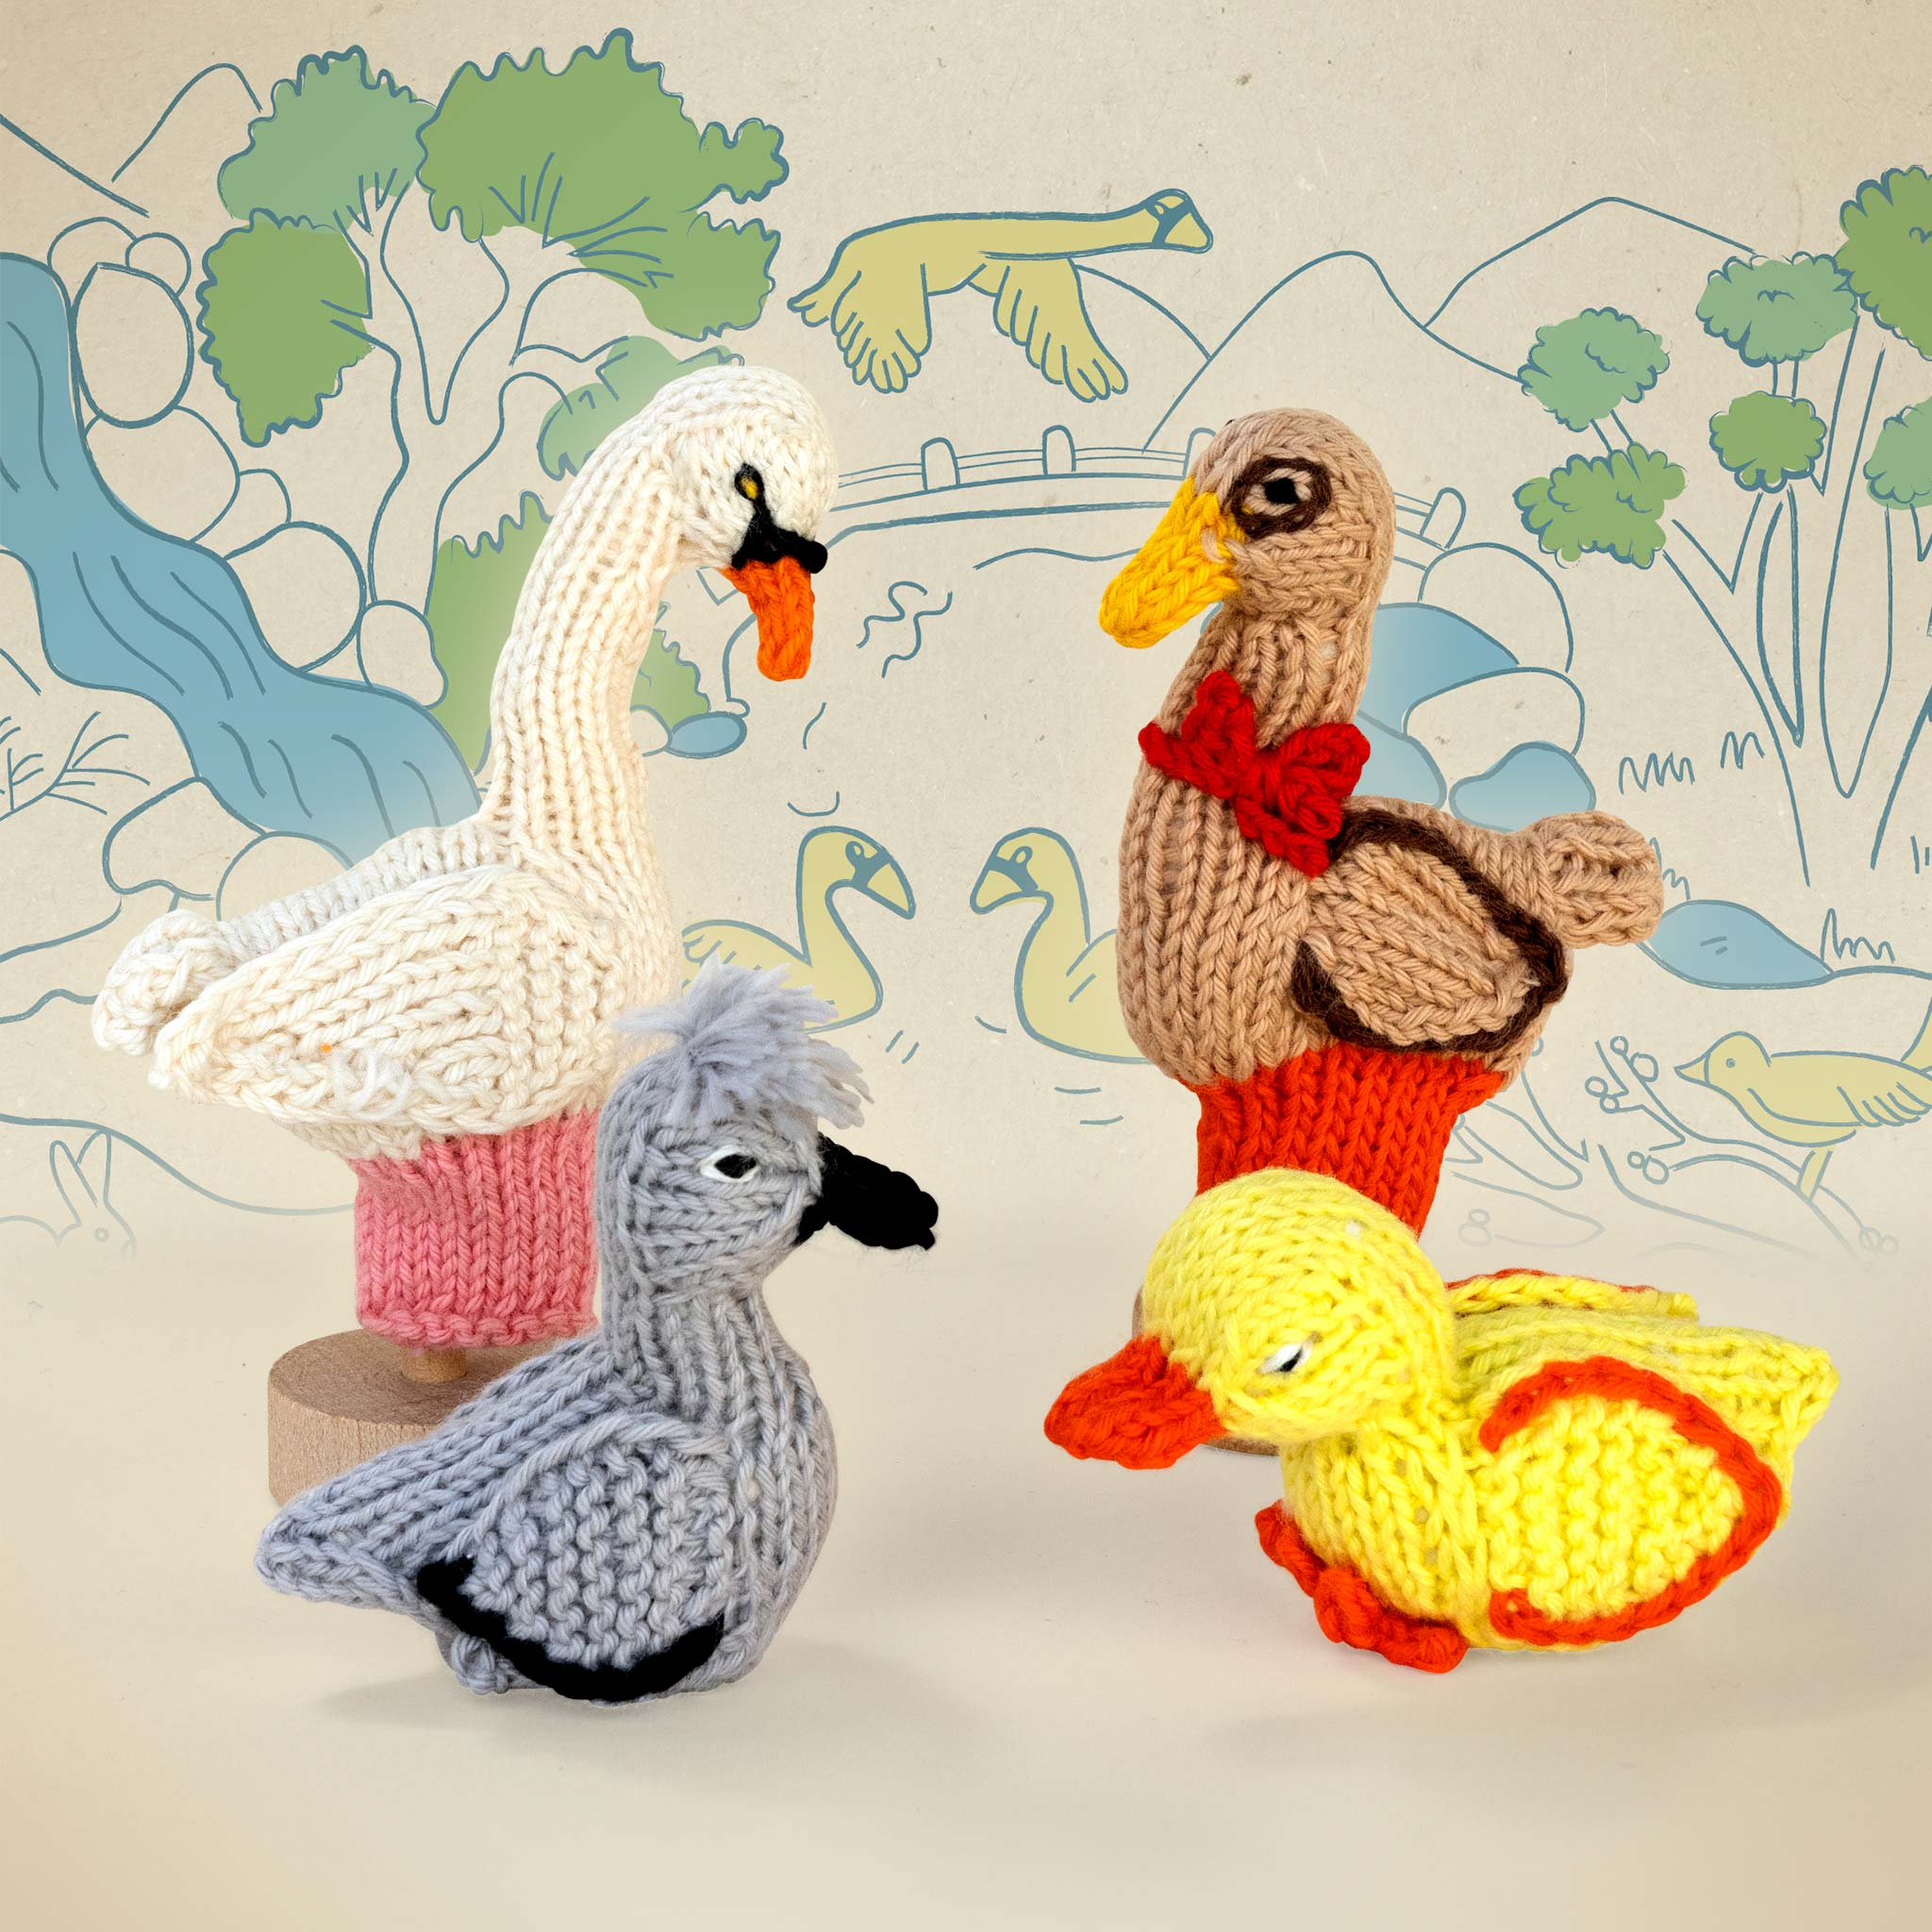 Fair Trade The Ugly Duckling Story Pack by Lucuma Designs